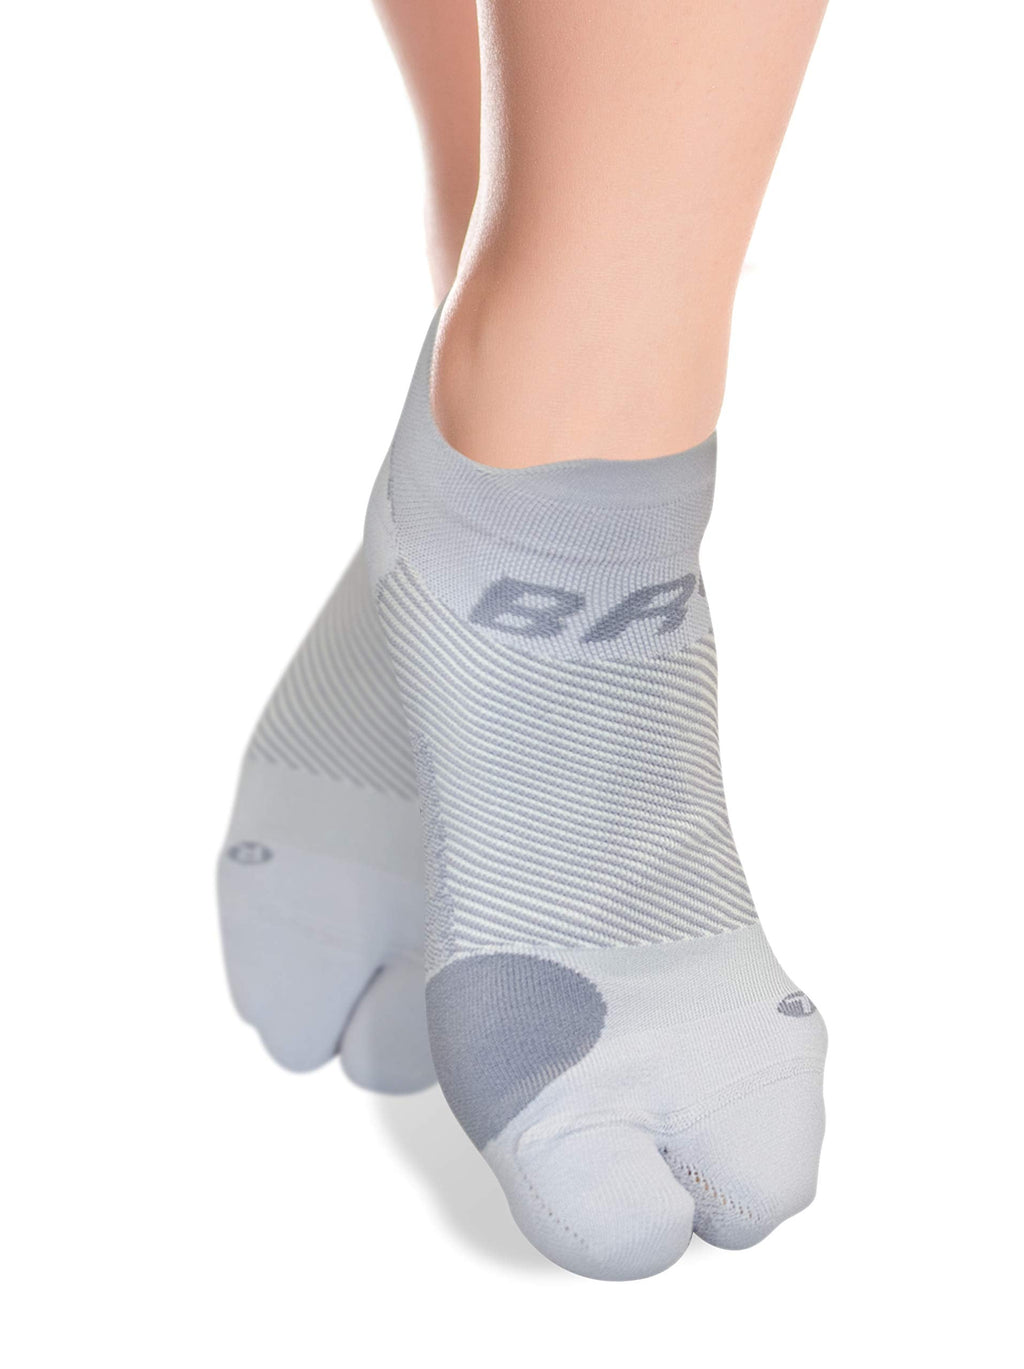 [Australia] - Bunion Relief Socks by OrthoSleeve, Patented Split-Toe Design with a Cushioned Bunion Pad Separates Toes, Relieves Bunion Pain and Reduces Toe Friction (Grey, 1 Pair, Medium) Medium (1 Pair) Grey 